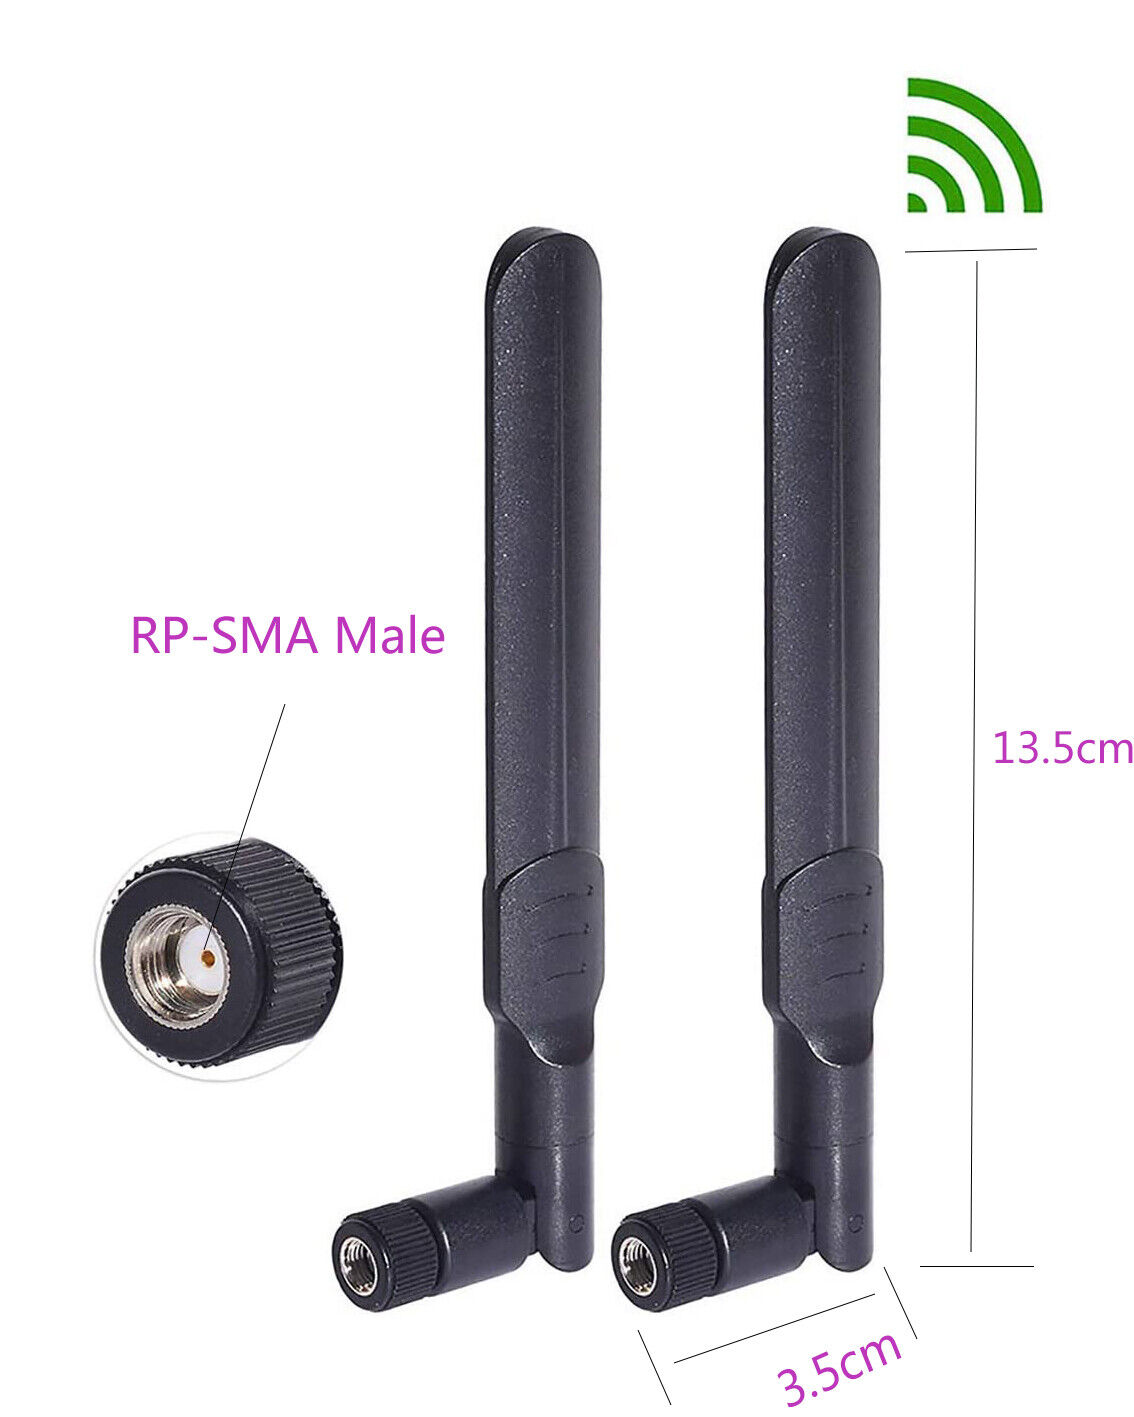 8dB 4G LTE RP-SMA Male Antenna 2pc For SPYPOINT Link Micro Link Dark Link Camera